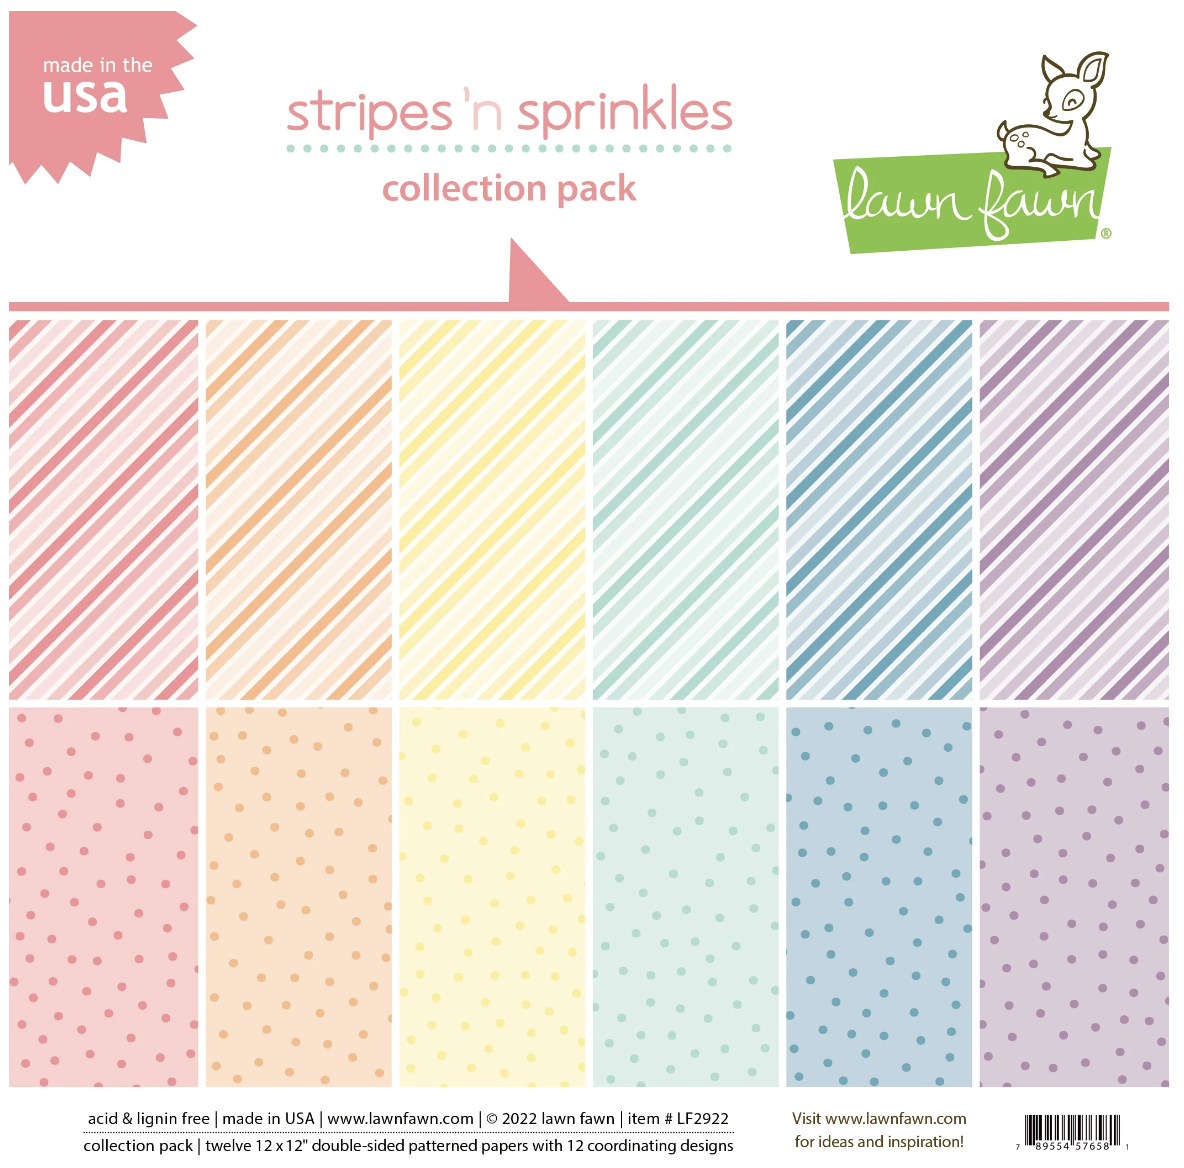 Lawn Fawn, stripes 'n sprinkles collection pack